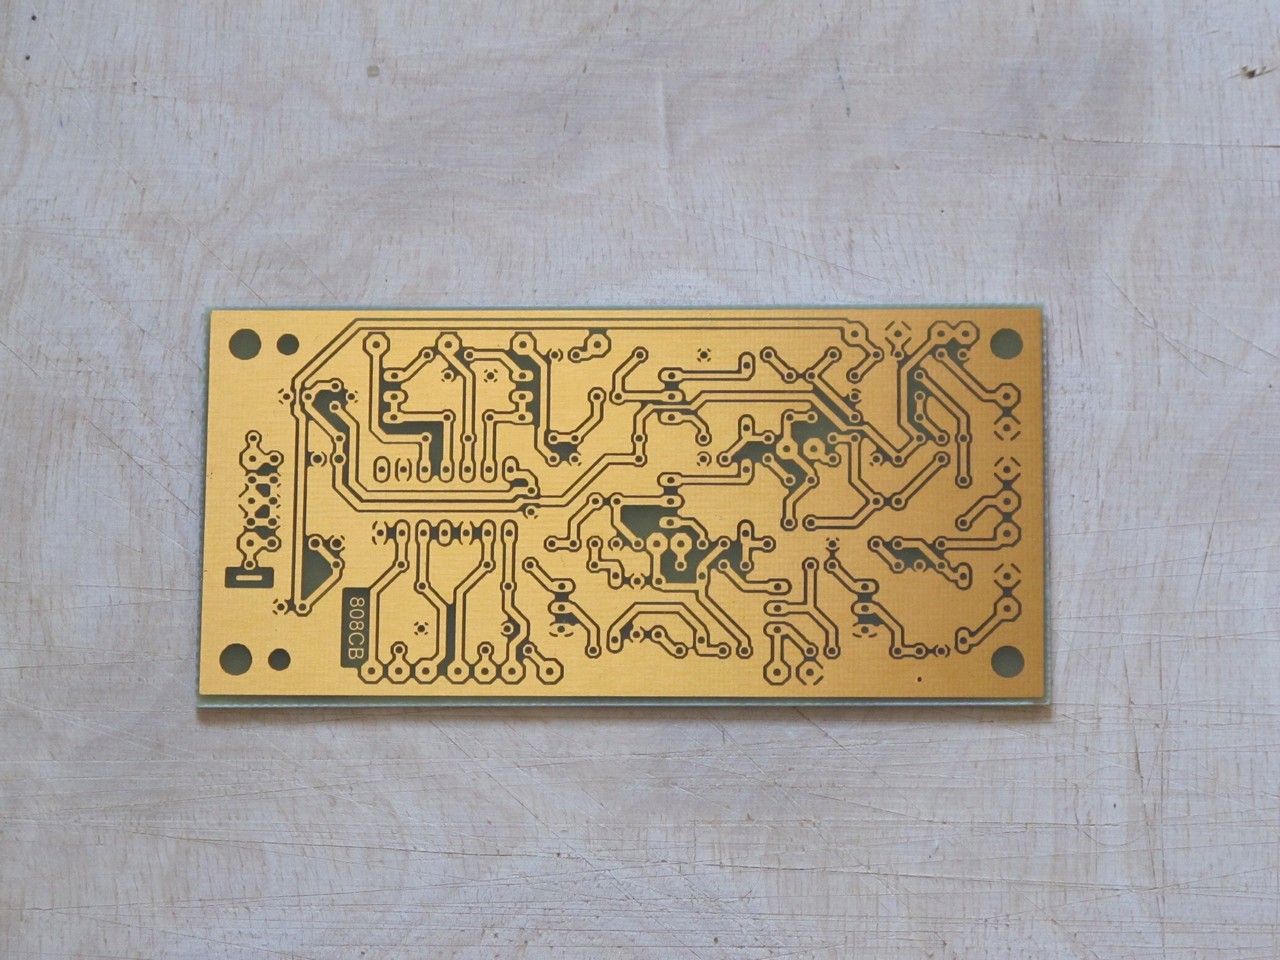 CB808 etched PCB